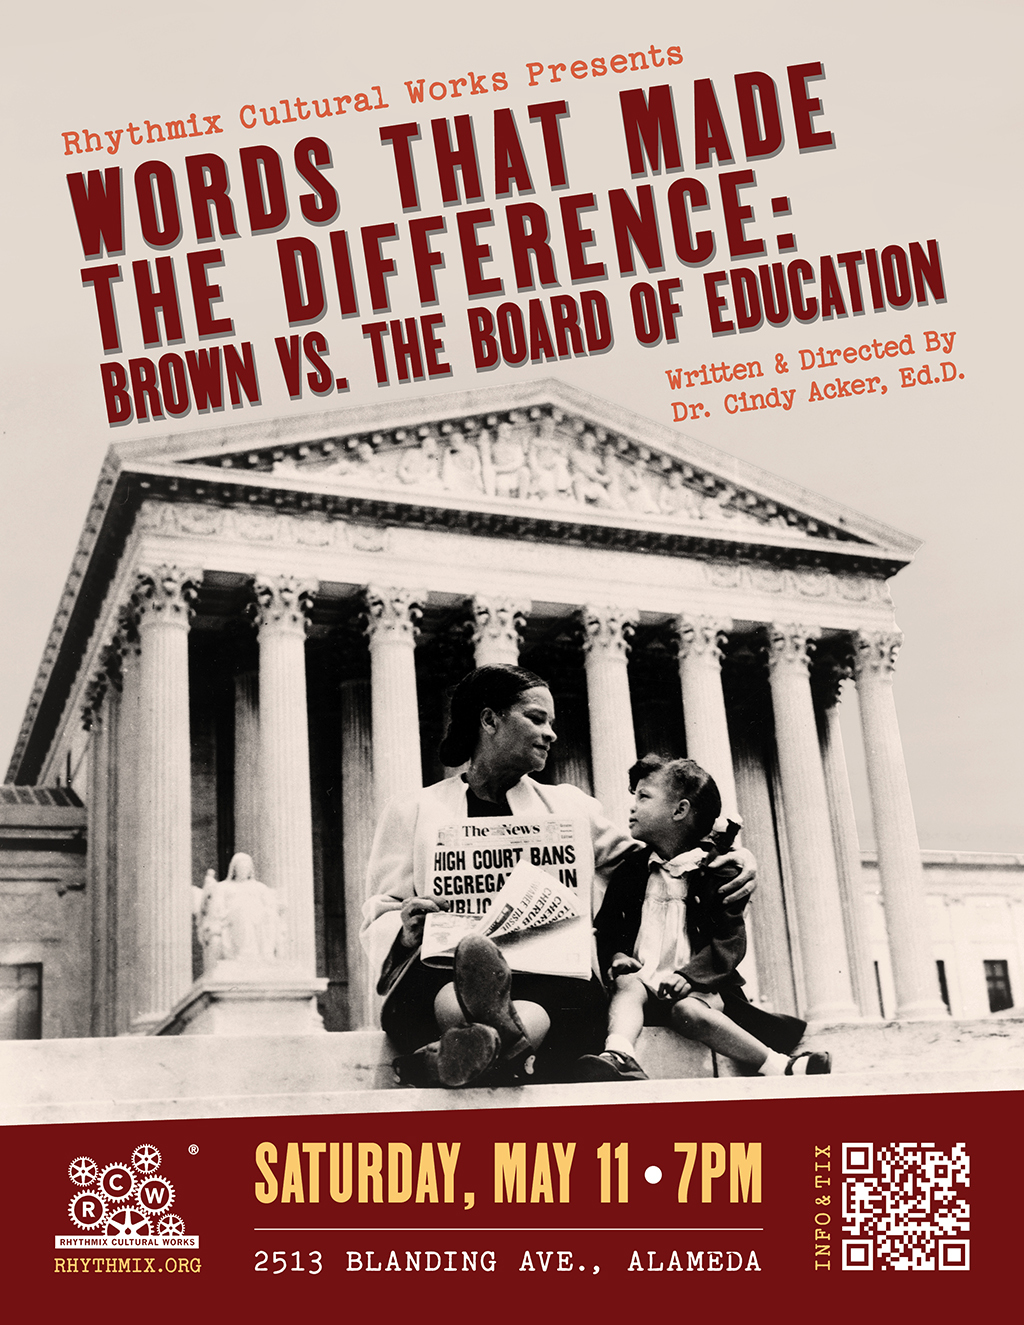 Rhythmix Cultural Works Rhythmix Cultural Works Presents  WORDS THAT MADE THE DIFFERENCE  BROWN VS  THE BOARD OF EDUCATION promotion flier on Digifli com